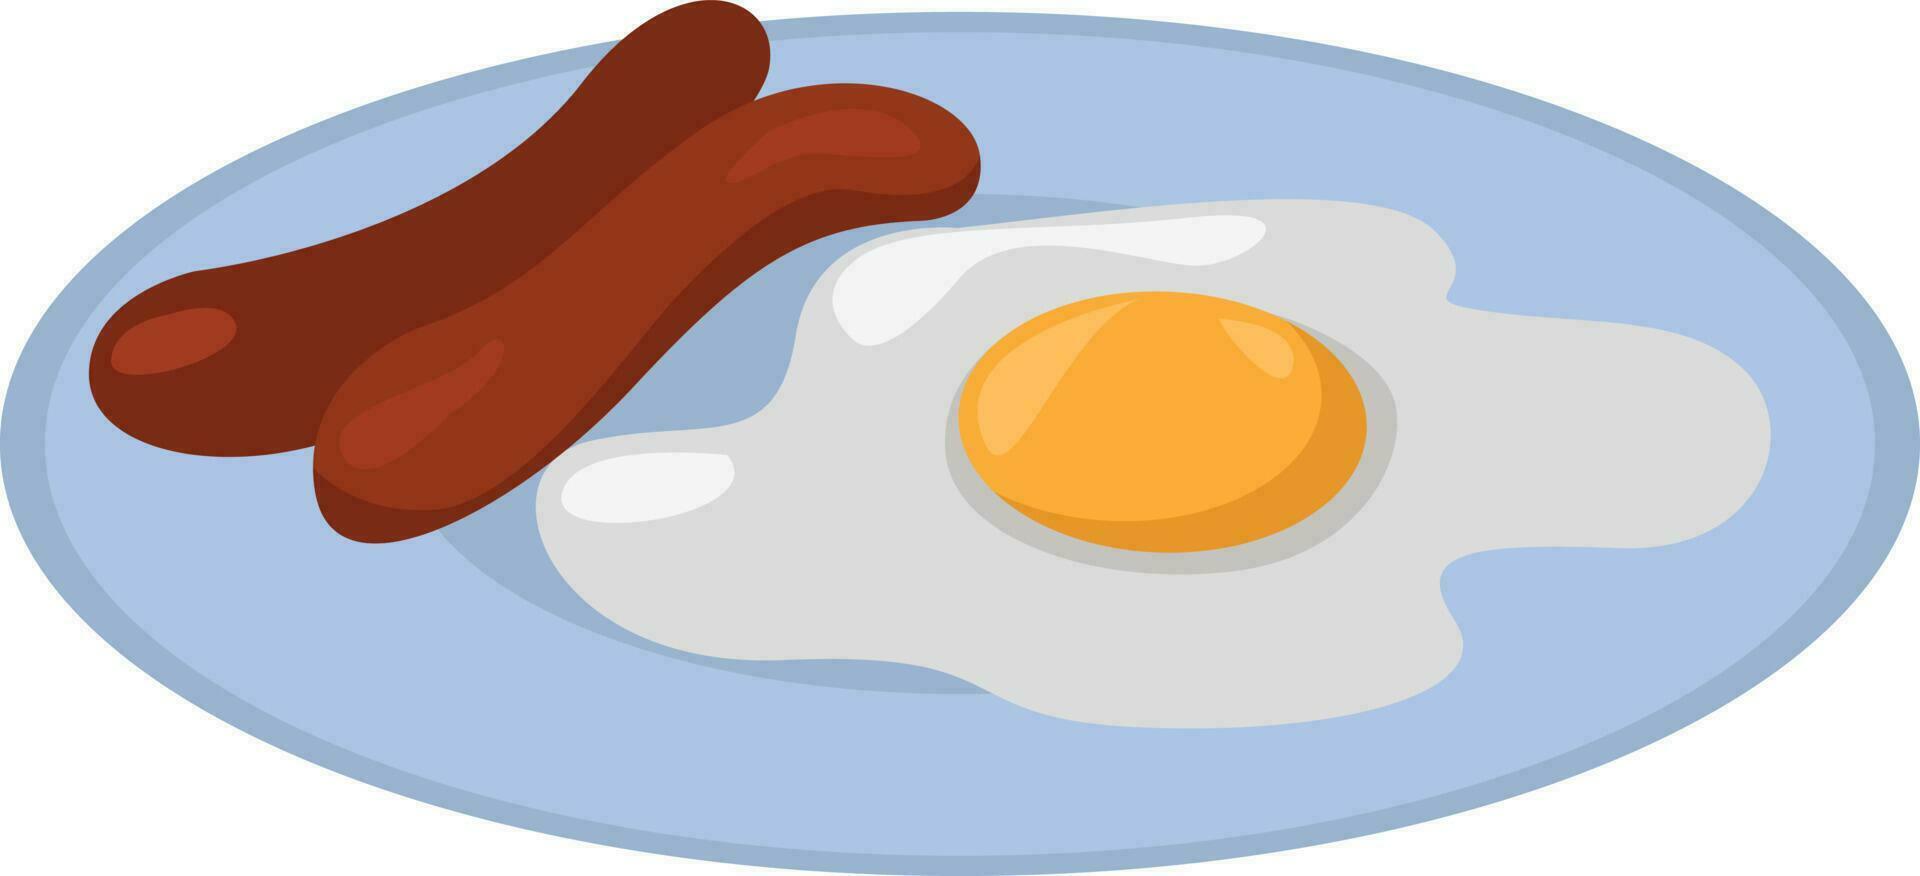 Bacon and eggs,illustration,vector on white background vector